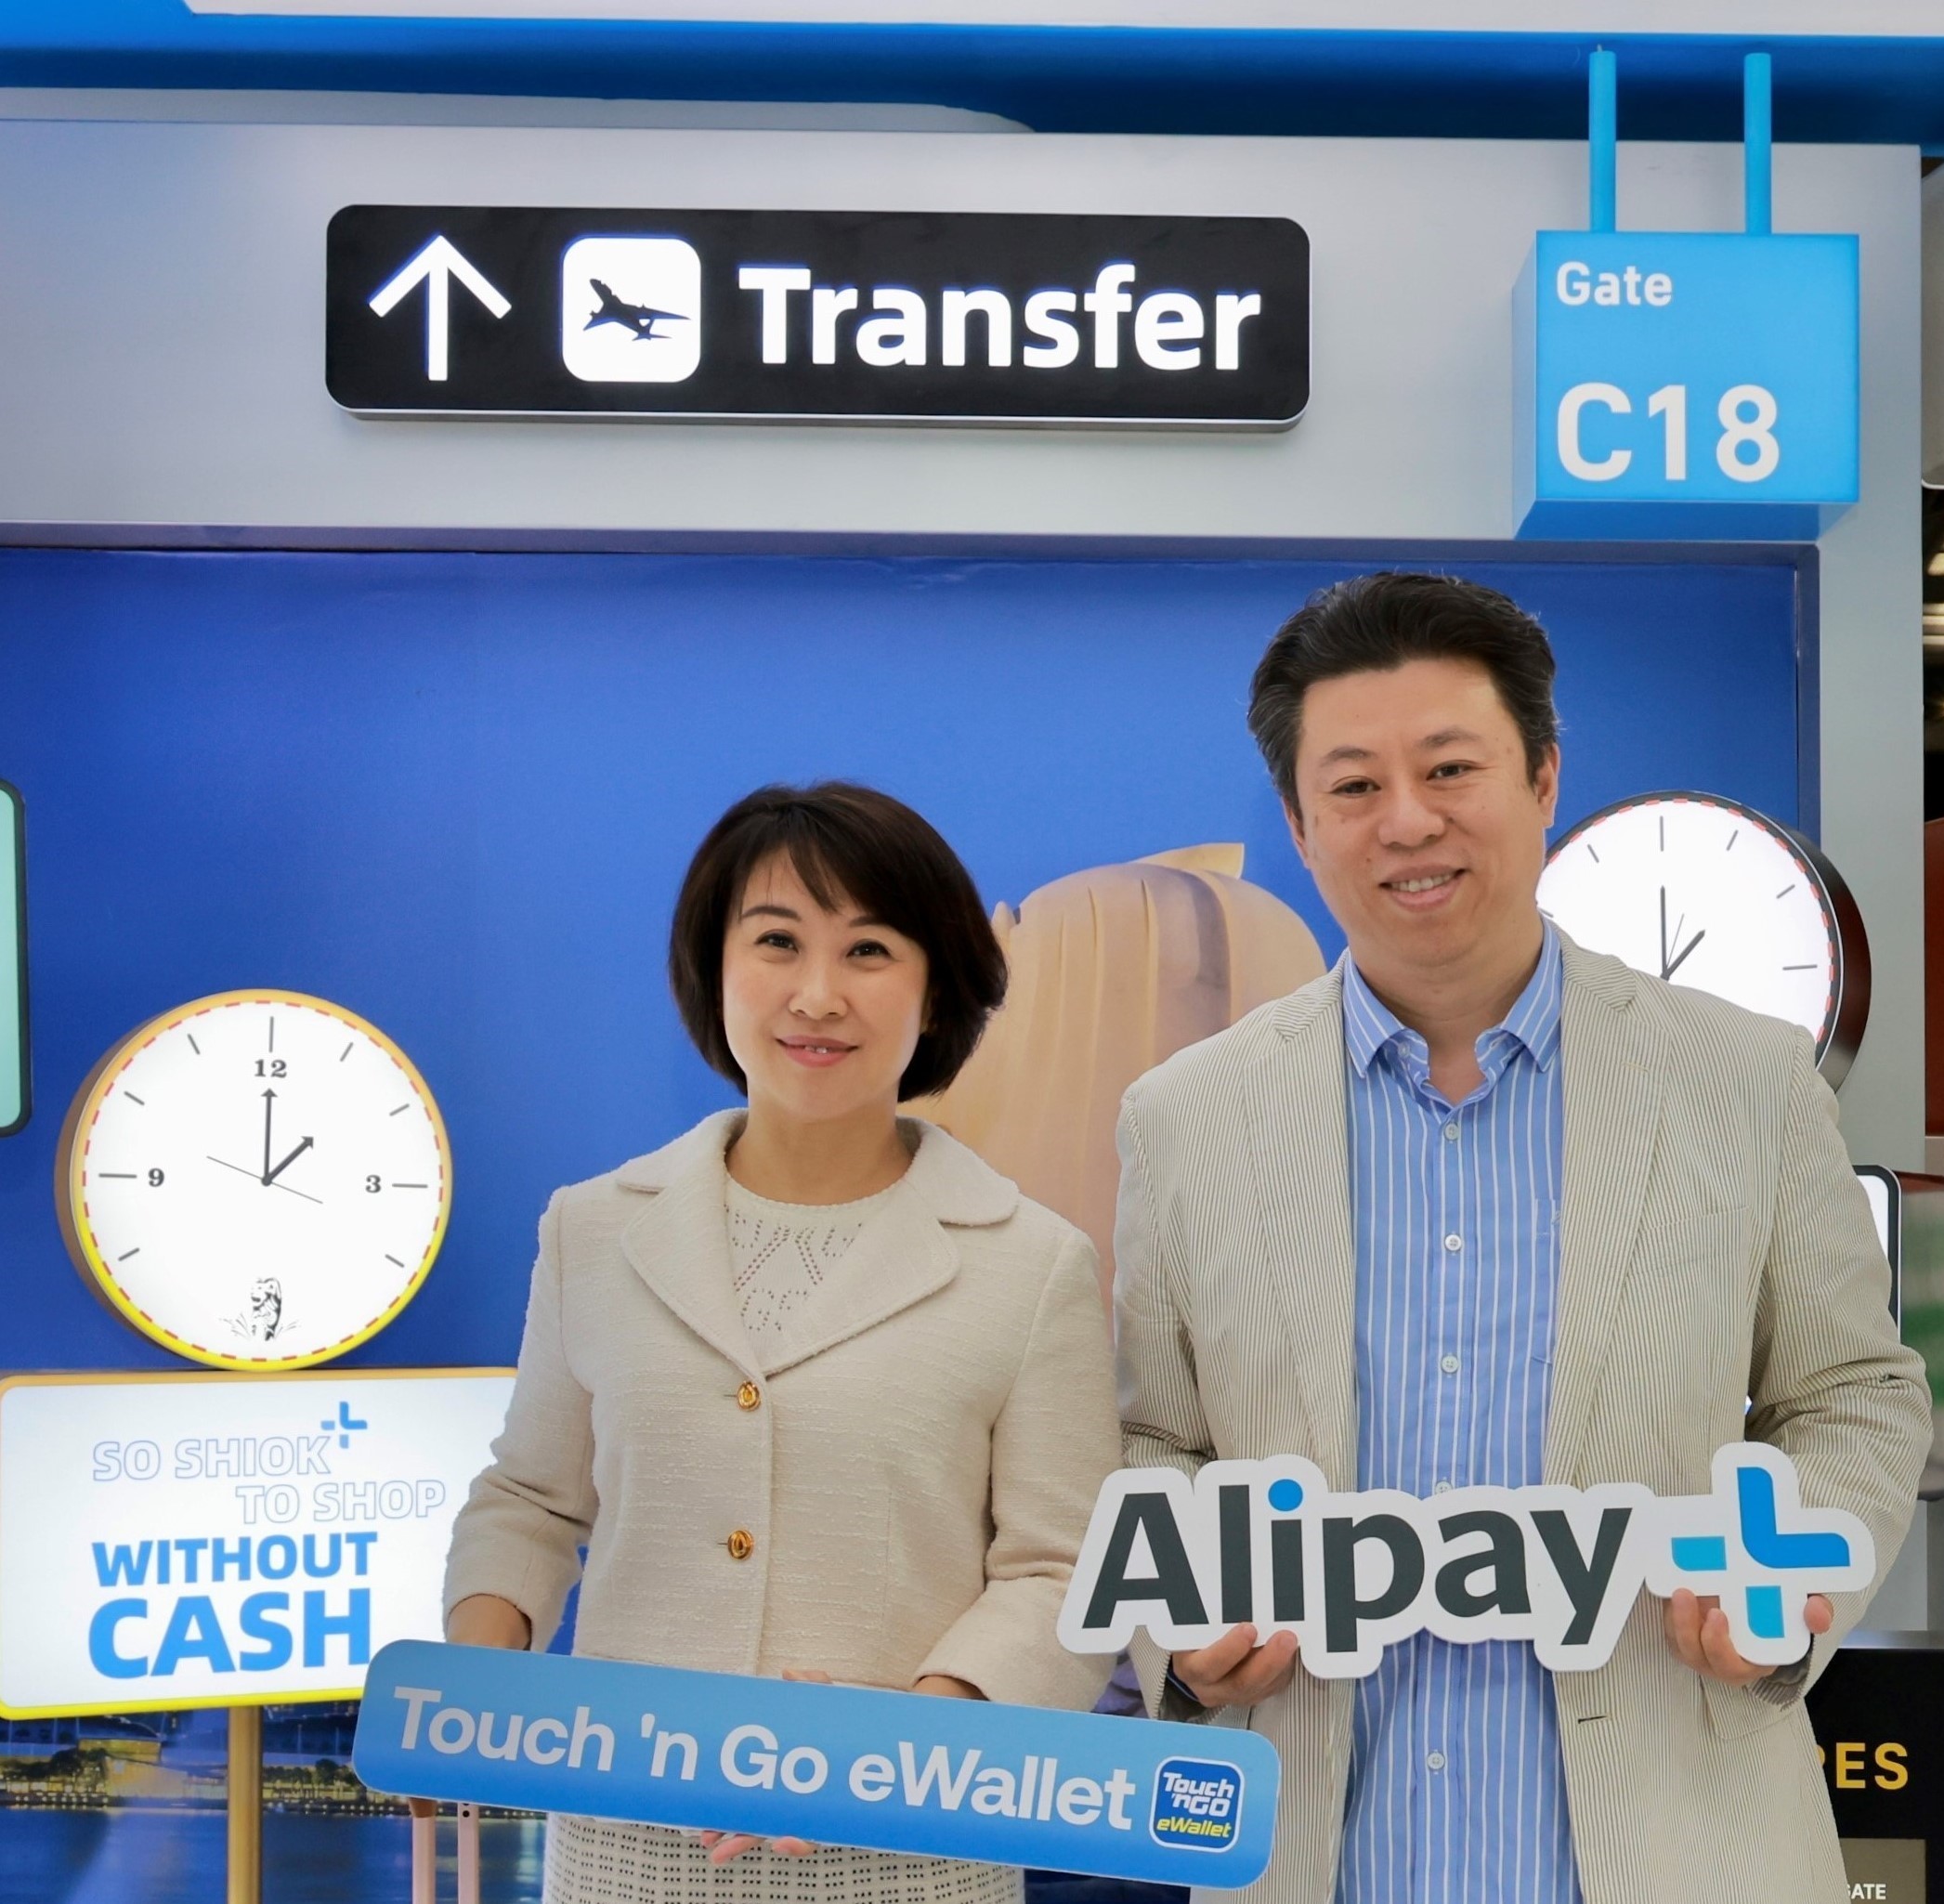 Touch ‘n Go eWallet expands its cross-border payment capabilities to Mainland China